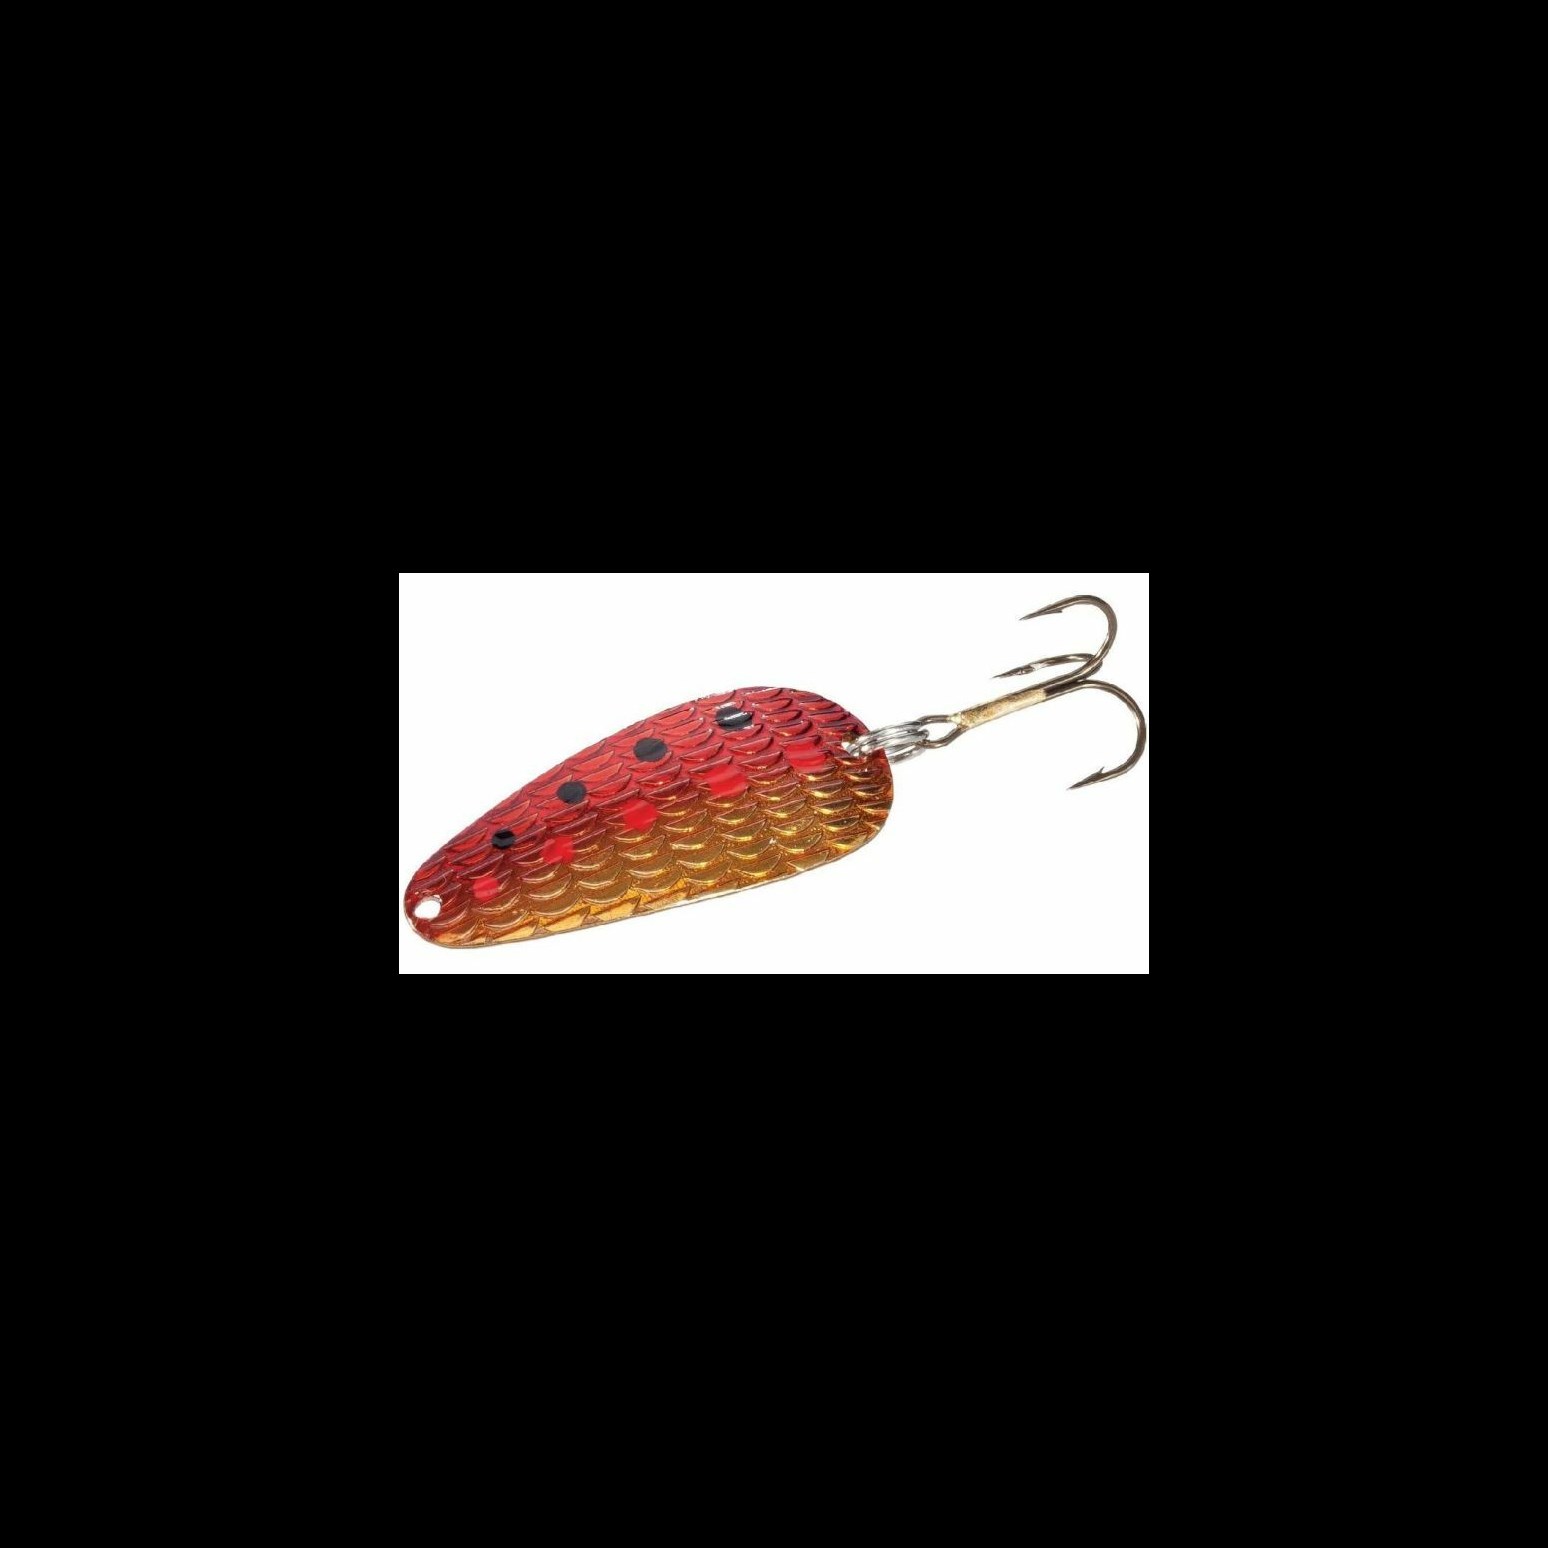 Thomas Cyclone Wobbler Spoon Freshwater Fishing Lure, Gold/Red, 1 1/2, 1/6 oz., Size: Standard